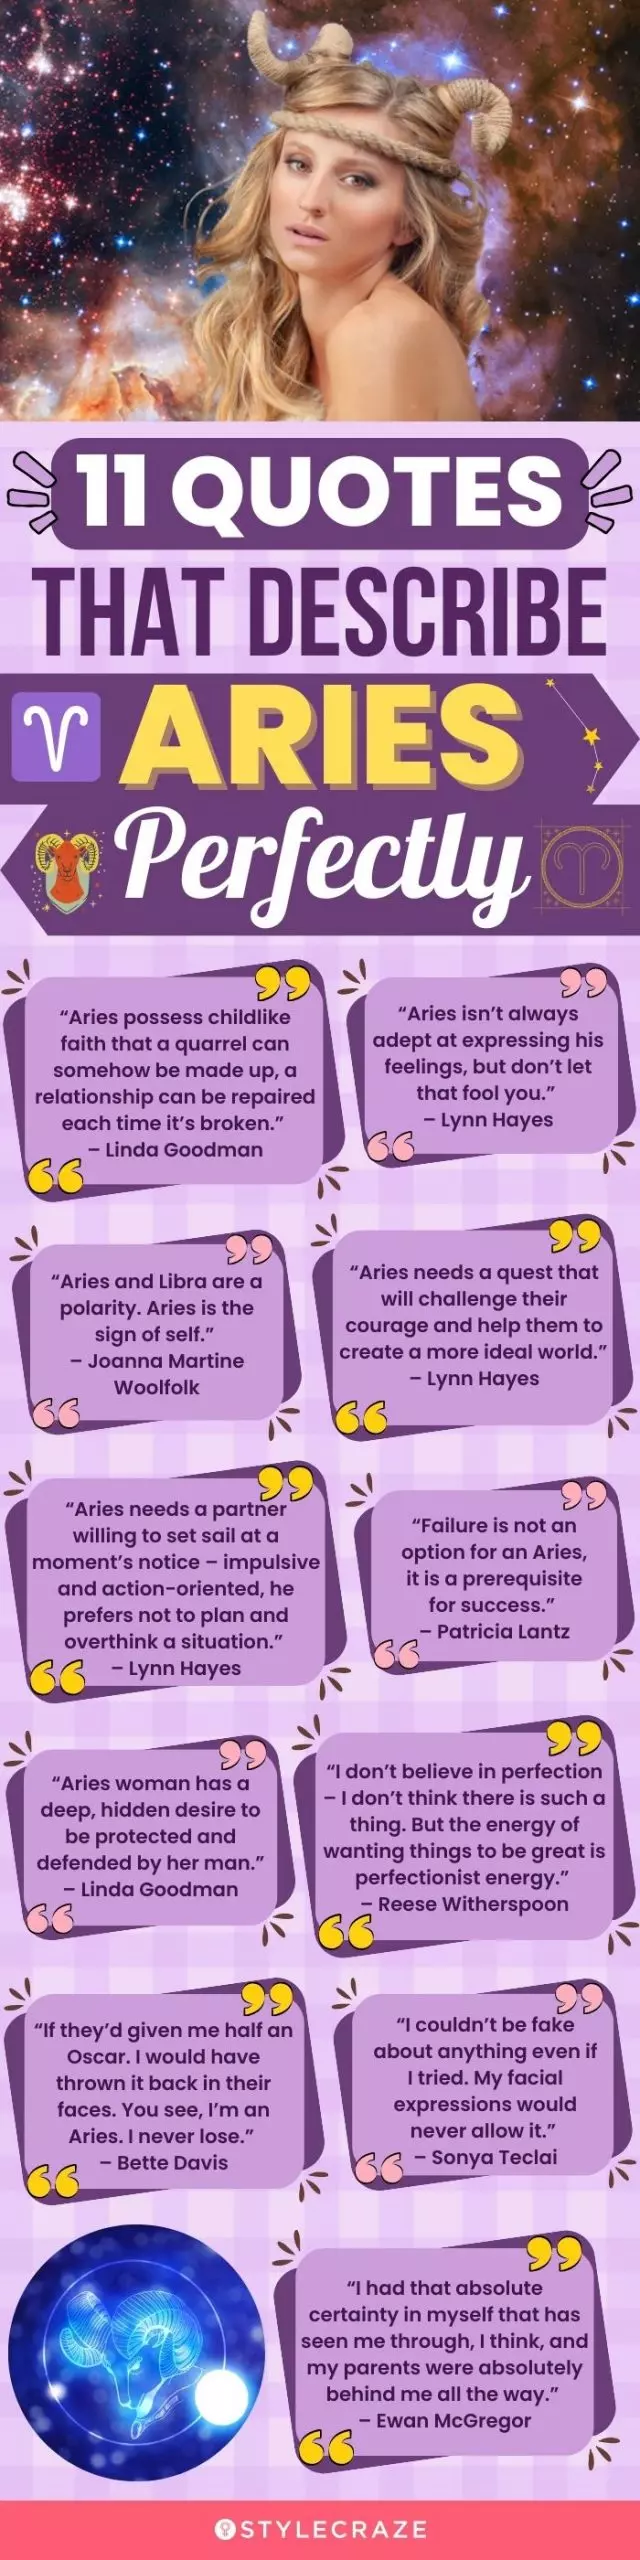 11 quotes that describe aries perfectly (infographic)